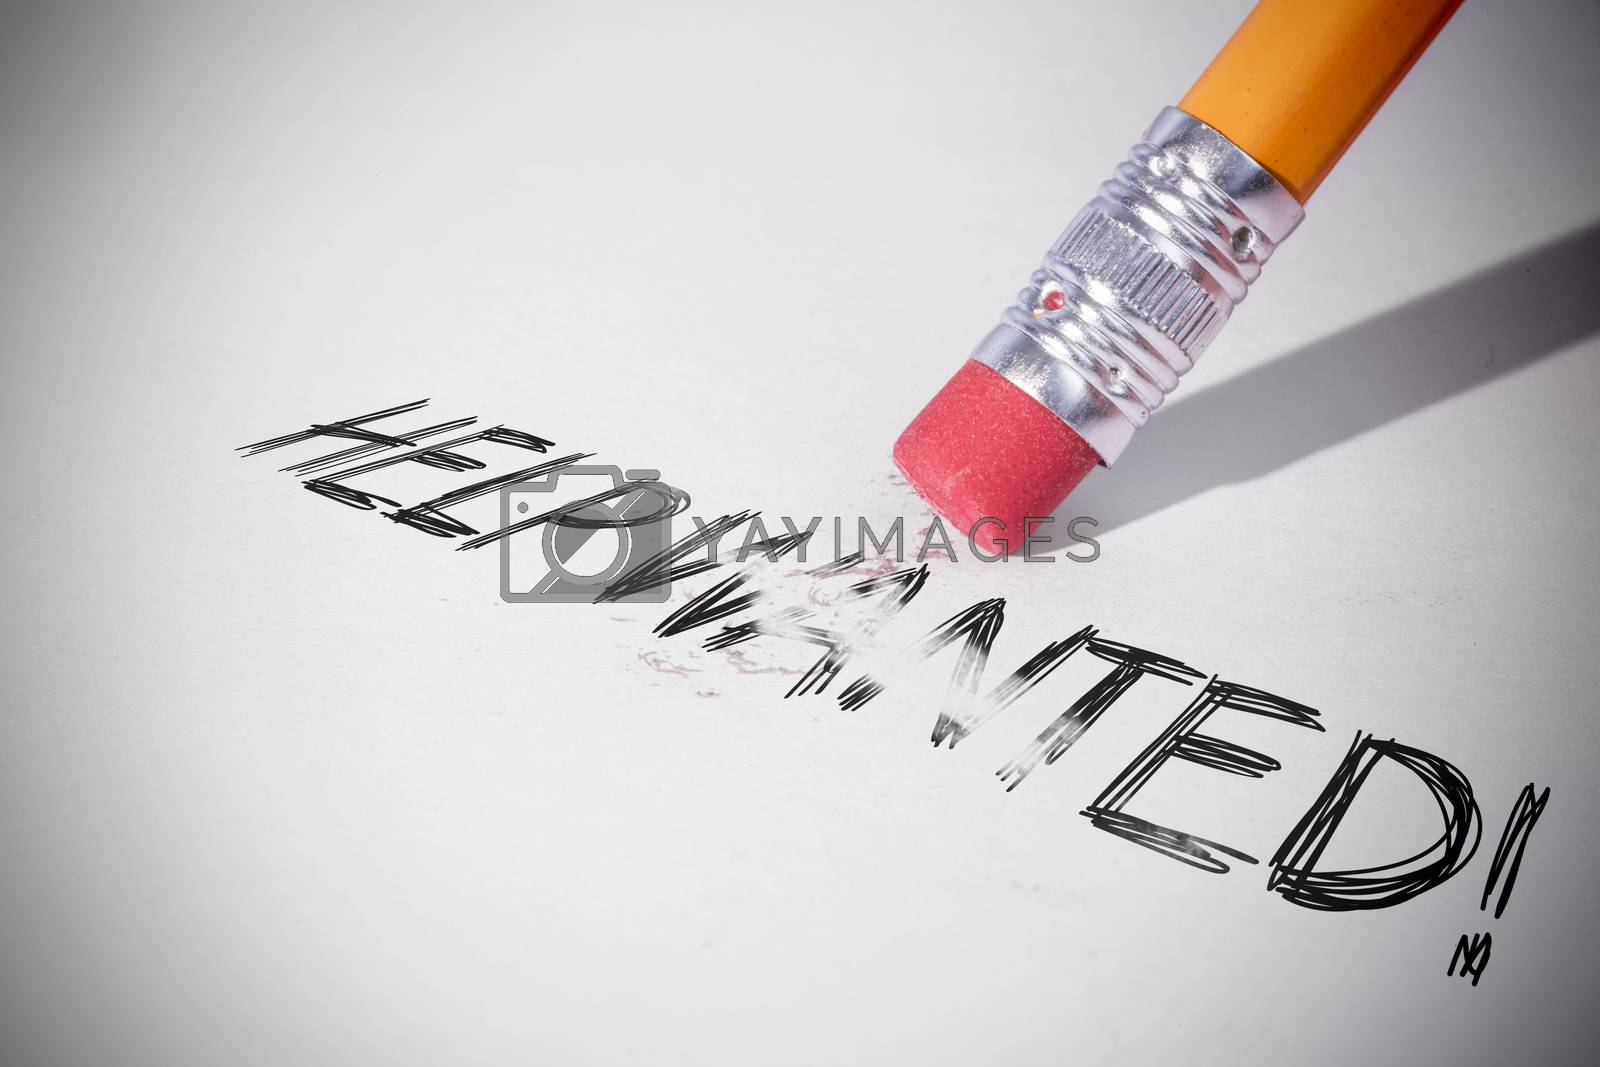 Royalty free image of Pencil erasing the word Help wanted! by Wavebreakmedia